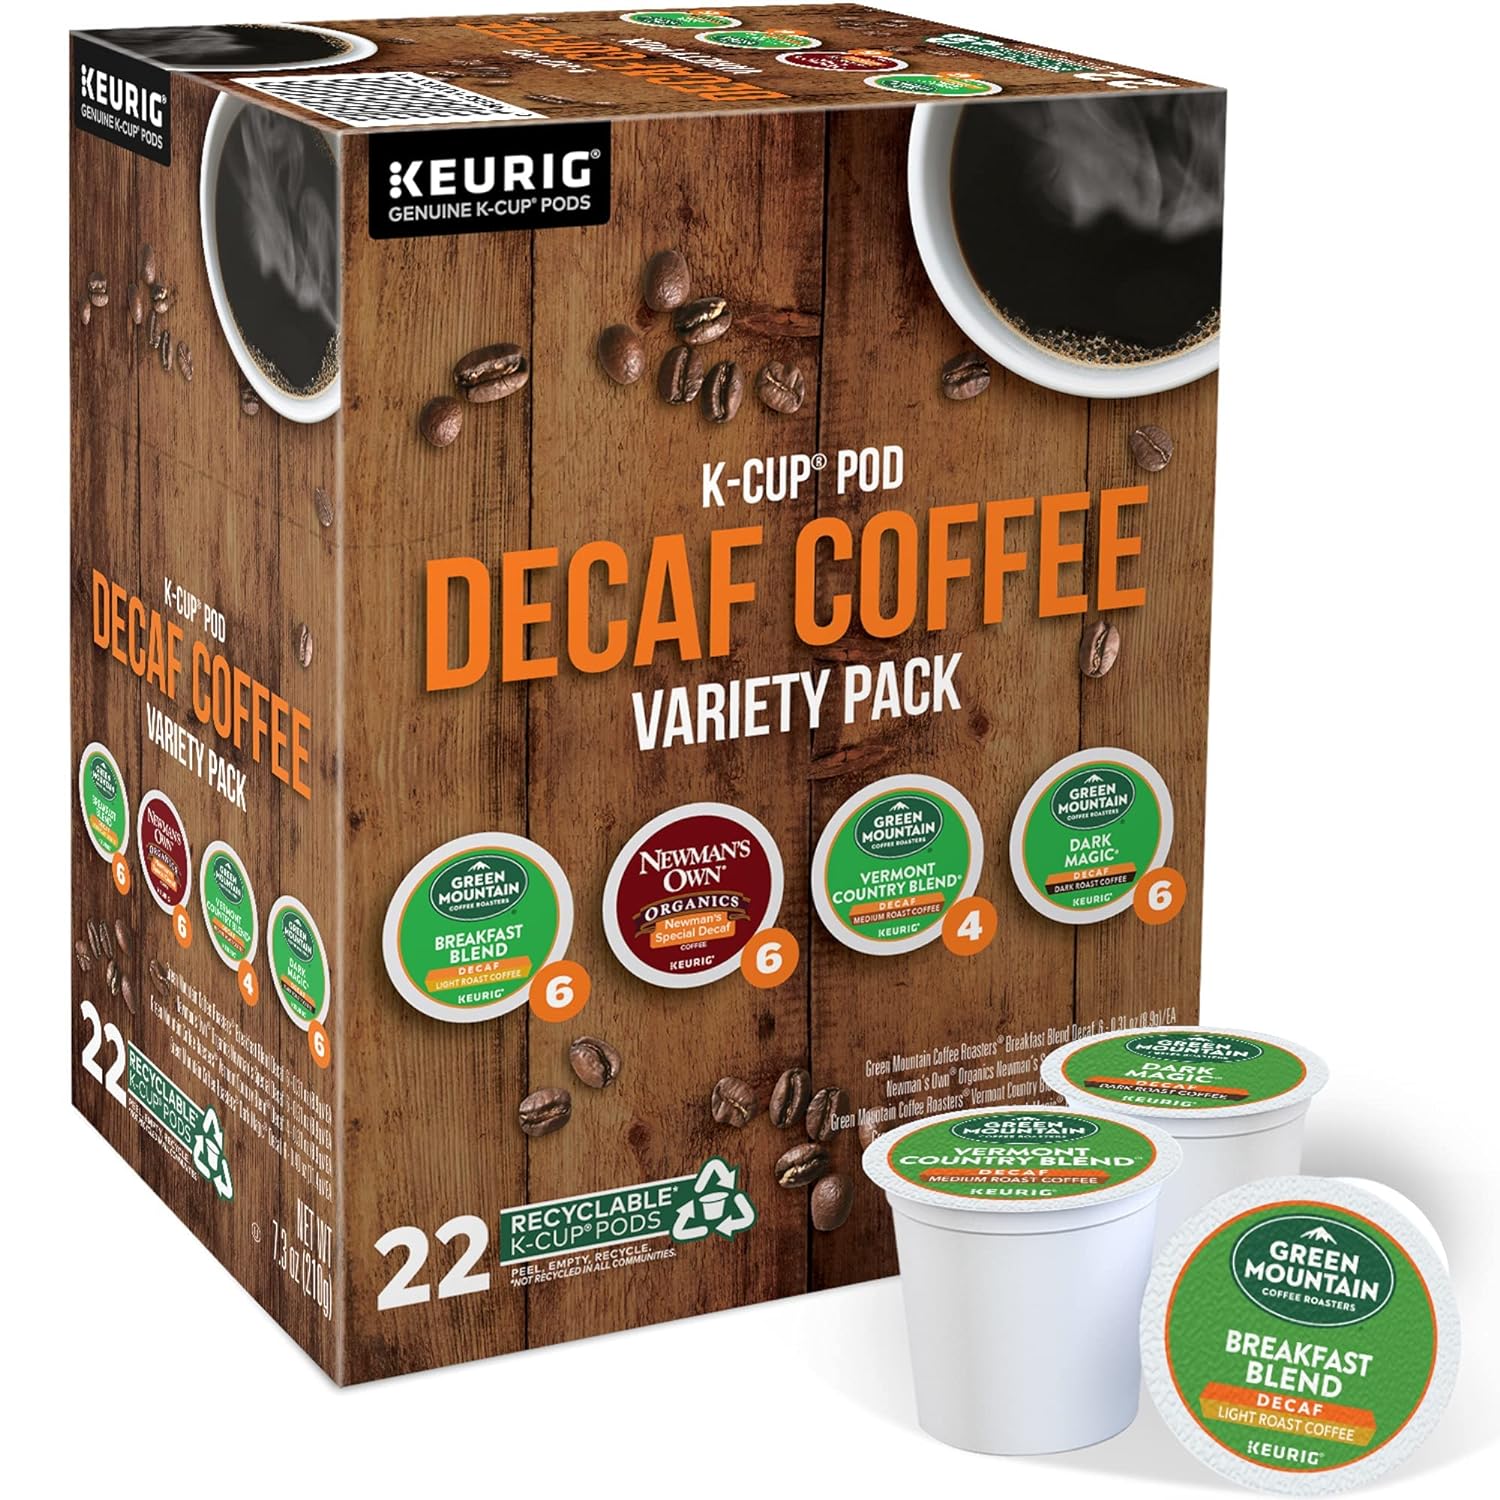 Keurig Green Mountain Coffee Roasters Decaf Coffee Variety Pack, Single-Serve K-Cup Pods, 22 Count